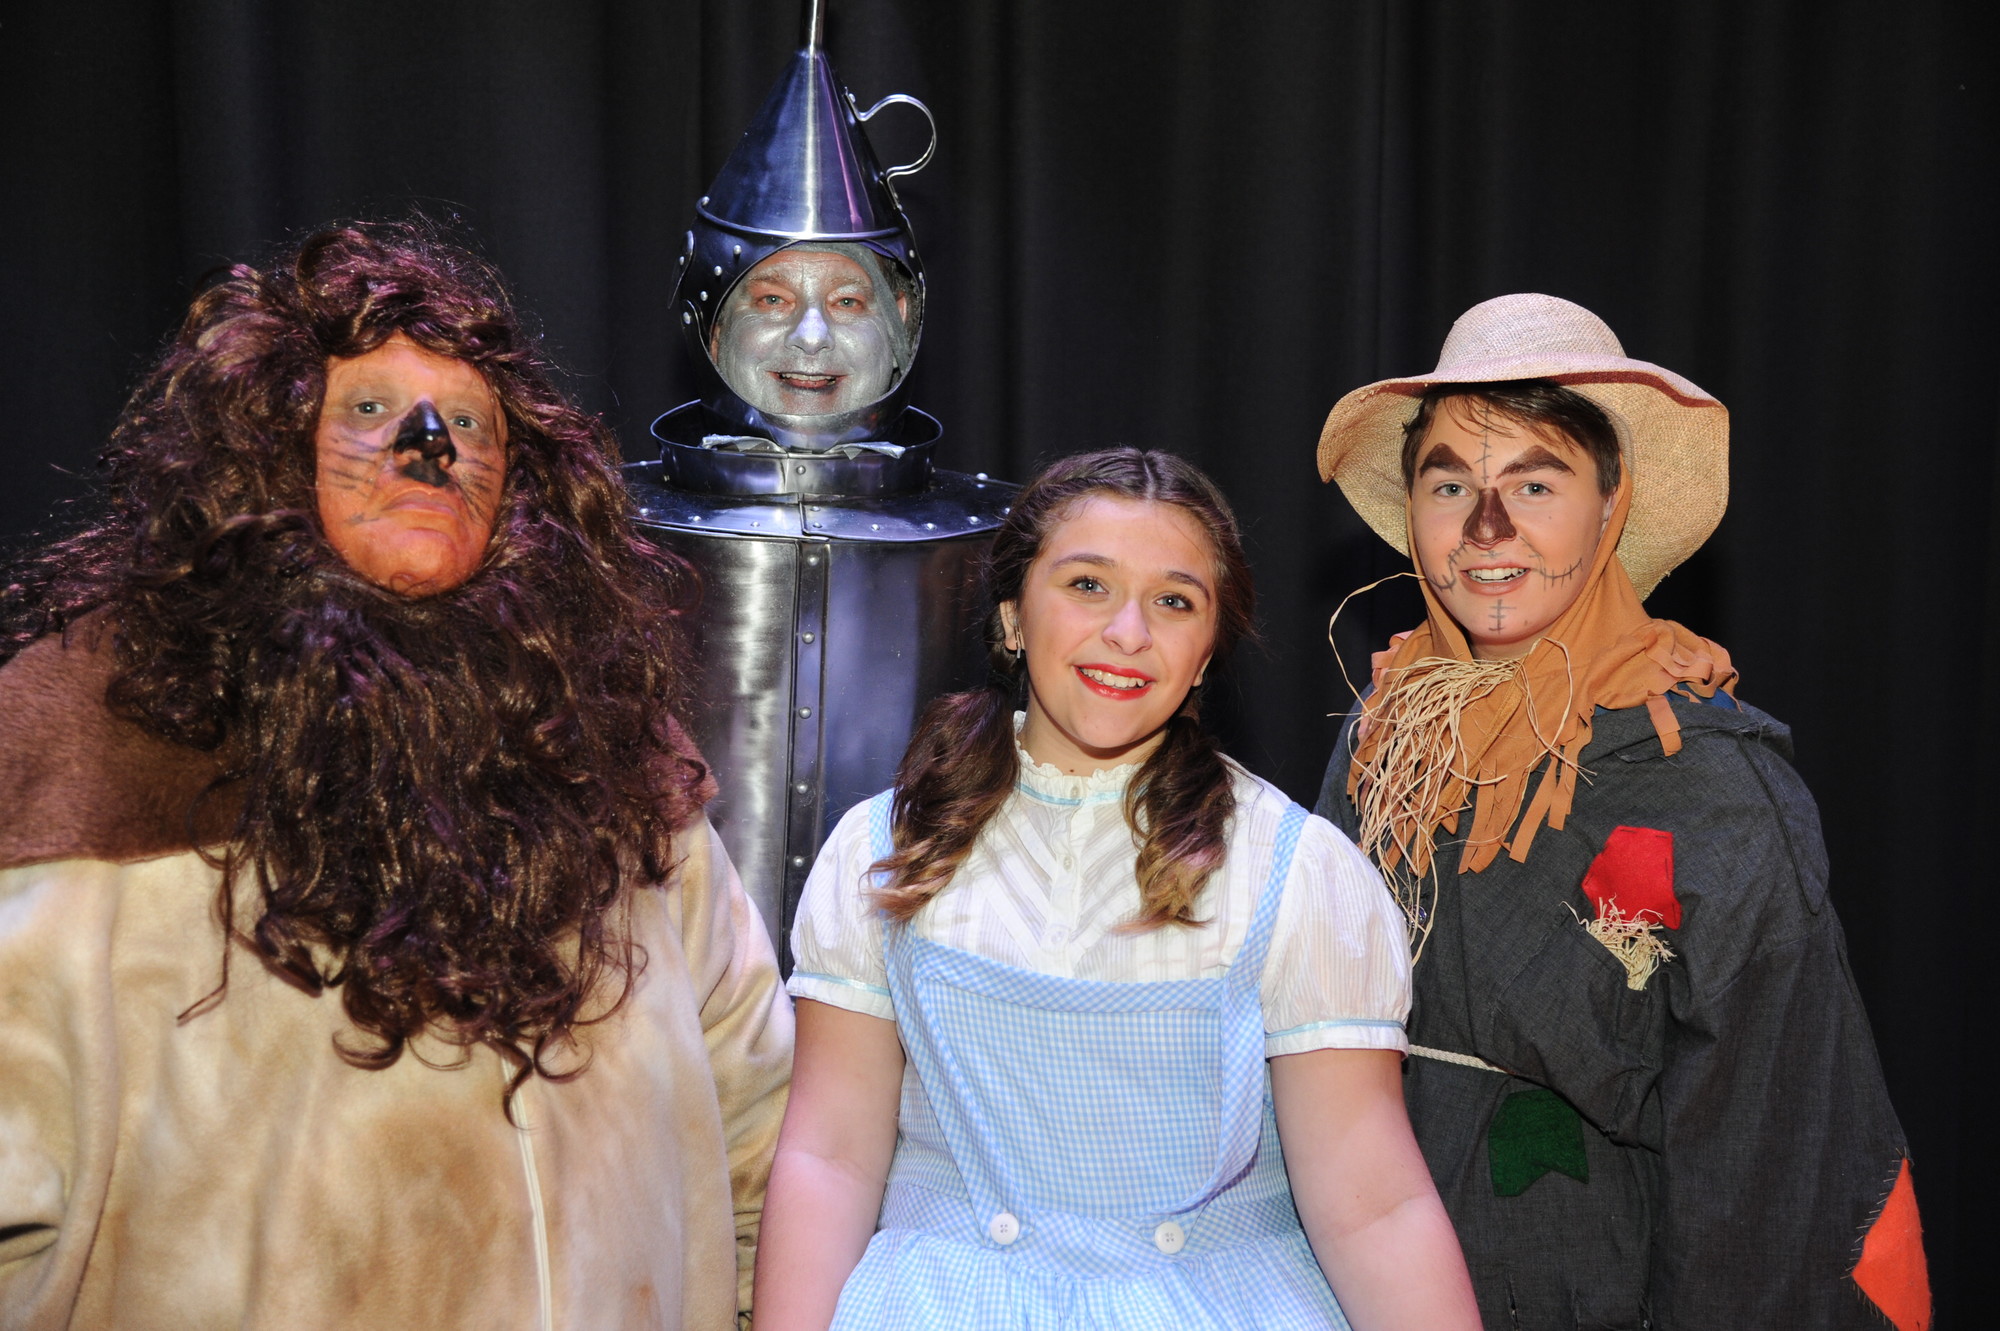 The foursome, on their way to find some courage, a heart, a home and a brain, were, from left, the Cowardly Lion, played by Philip Rogers, of Plainview; the Tin Man, played by Larry Schneider, of Oceanside; Dorothy Gale, played by Marissa Feminella, of Island Park; and the Scarecrow, played by Billy O’Brien, of Valley Stream.